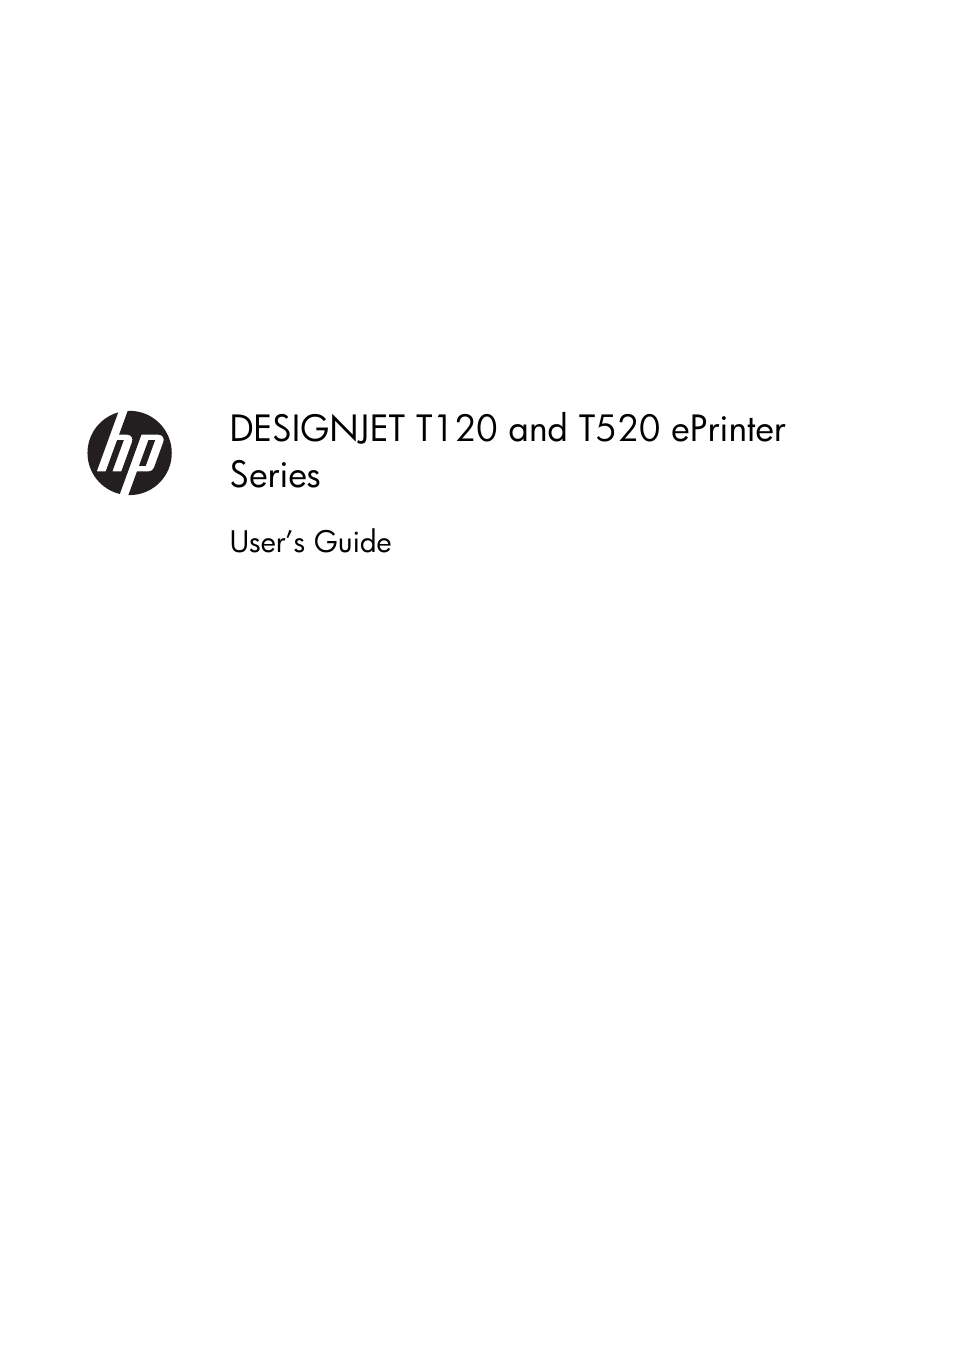 HP Designjet T120 ePrinter User Manual | 156 pages | Also for: Designjet  T520 ePrinter series